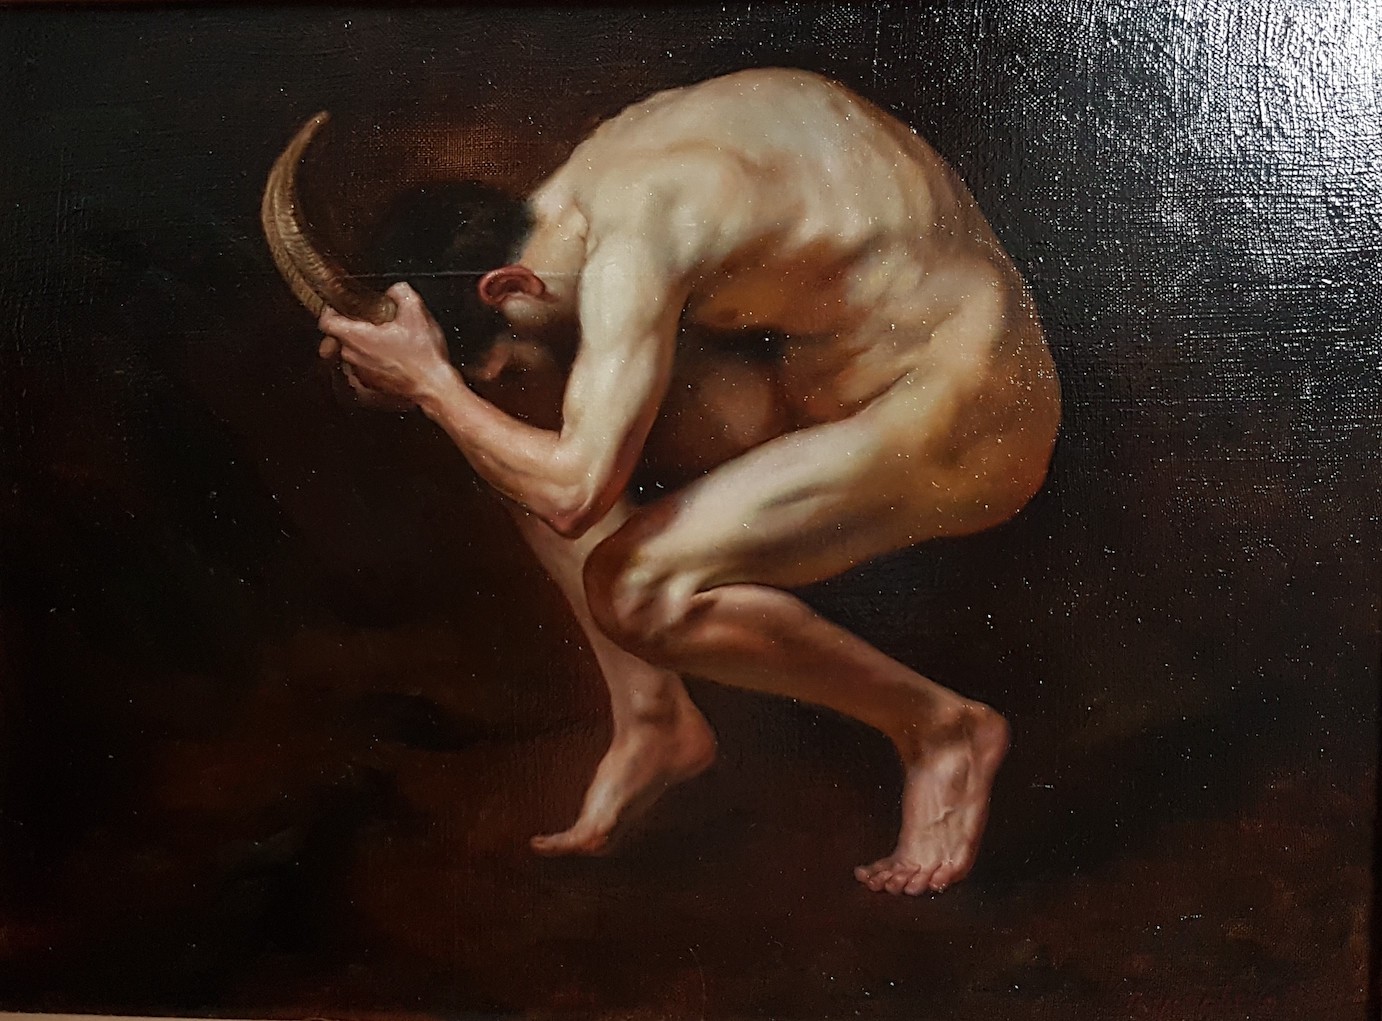 TORMENT OF THE PAN, 21x30cm, 2018